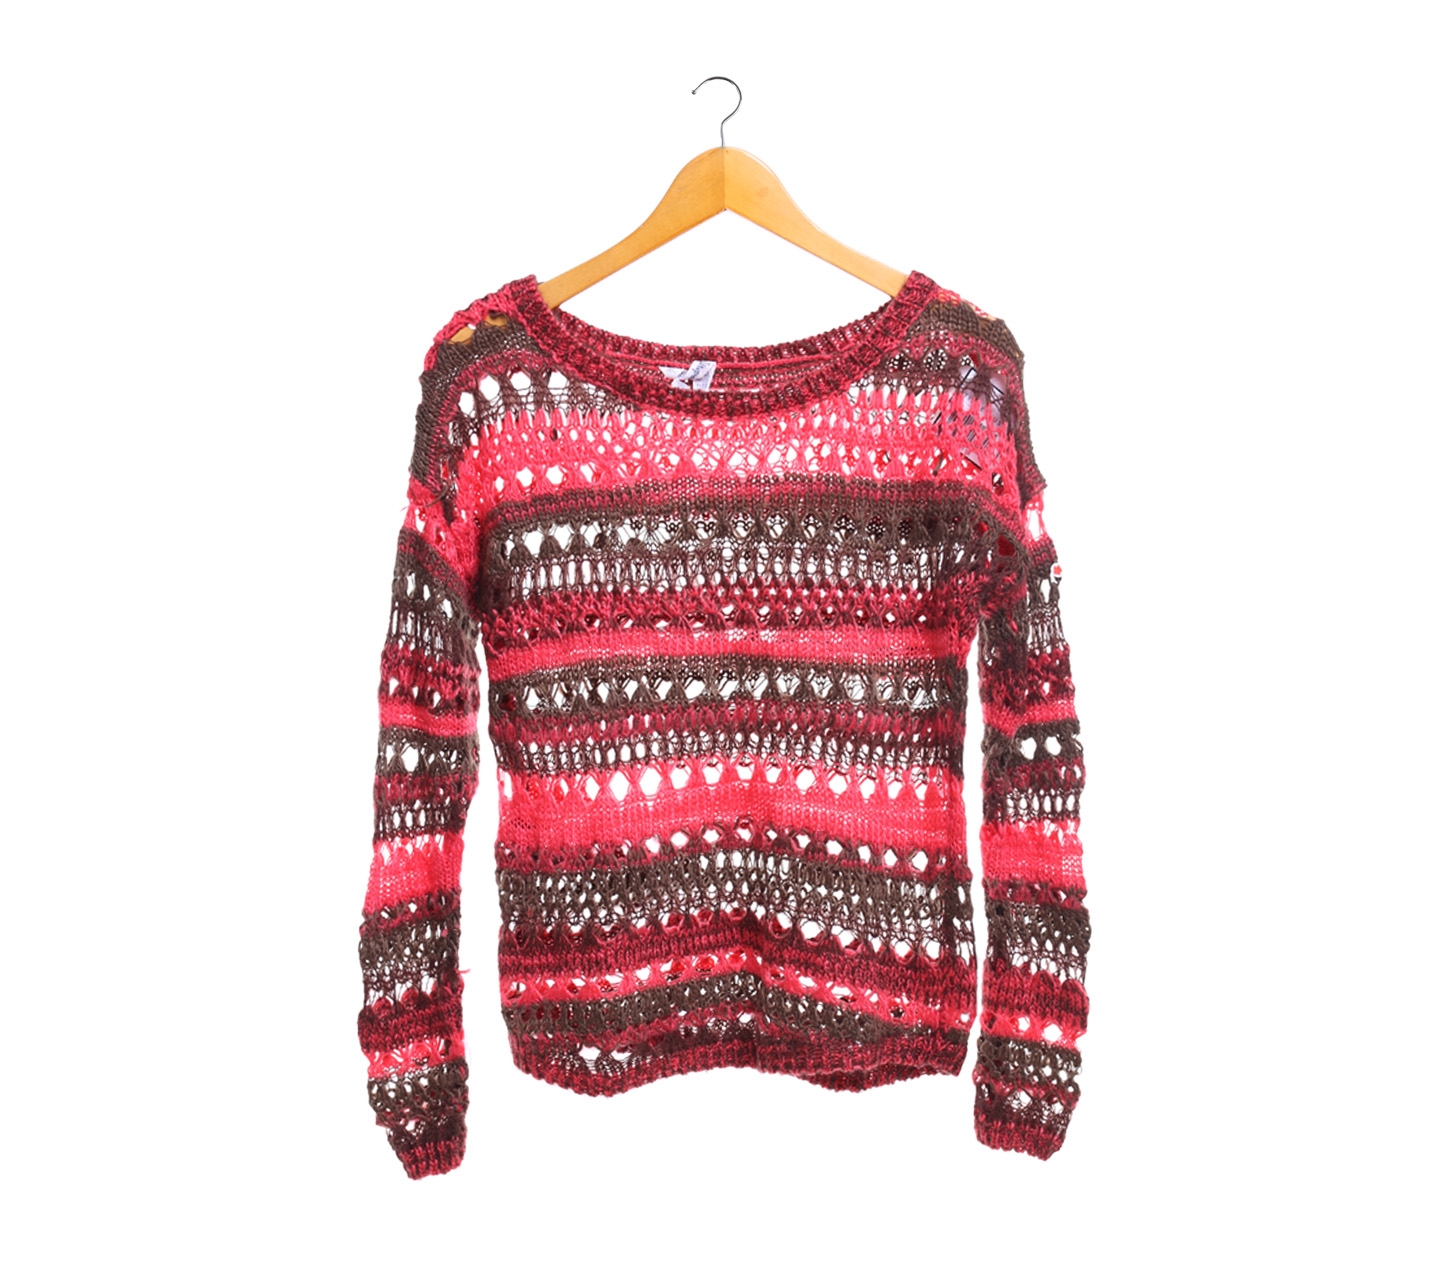 Aeropostale Pink And Grey Knit Sweater